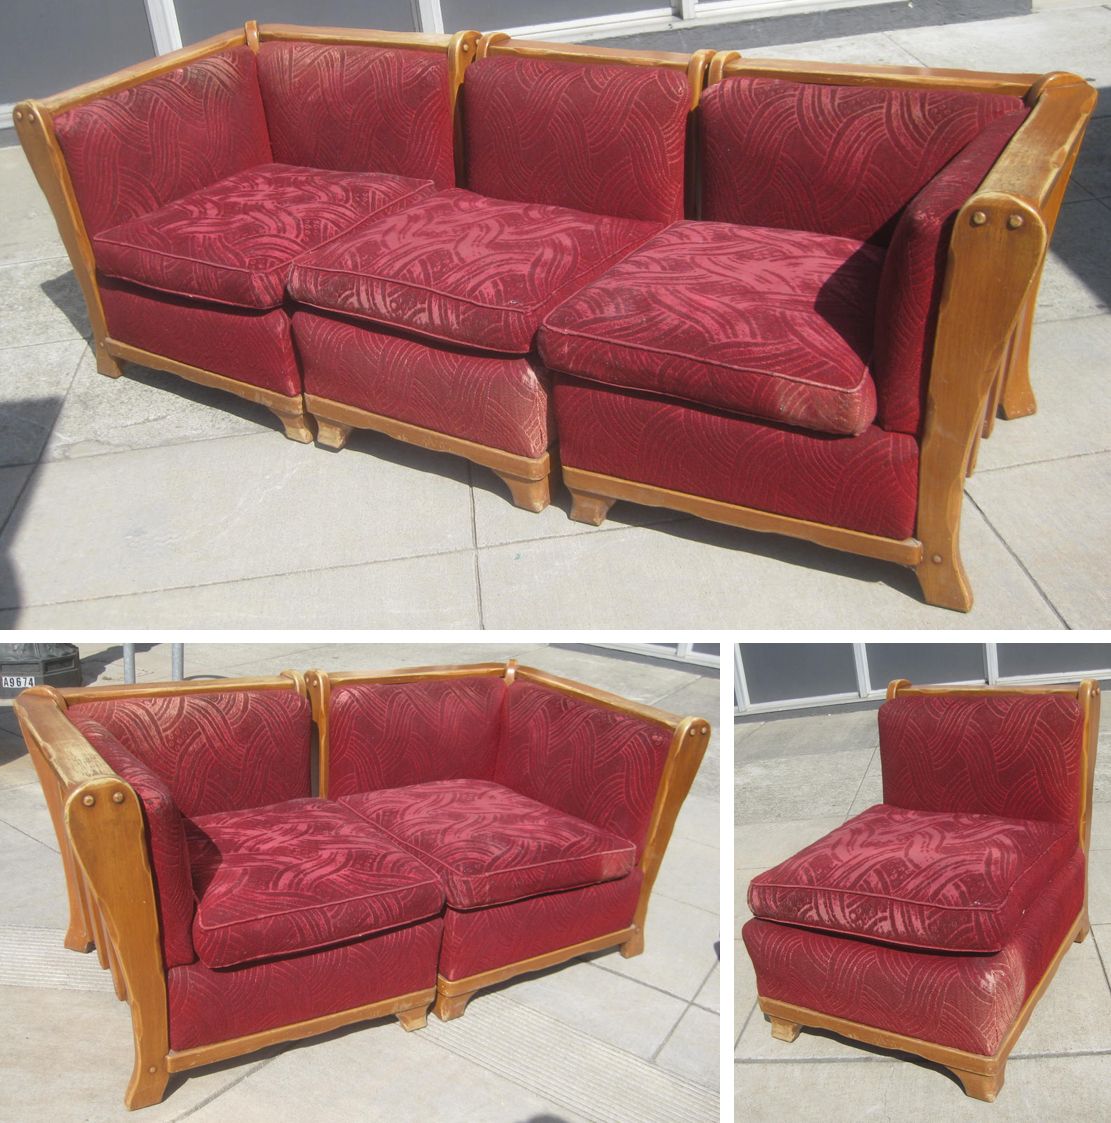 Uhuru Furniture & Collectibles: Sold – Red Velvet Sofa Throughout Strummer Velvet Sectional Sofas (View 13 of 15)